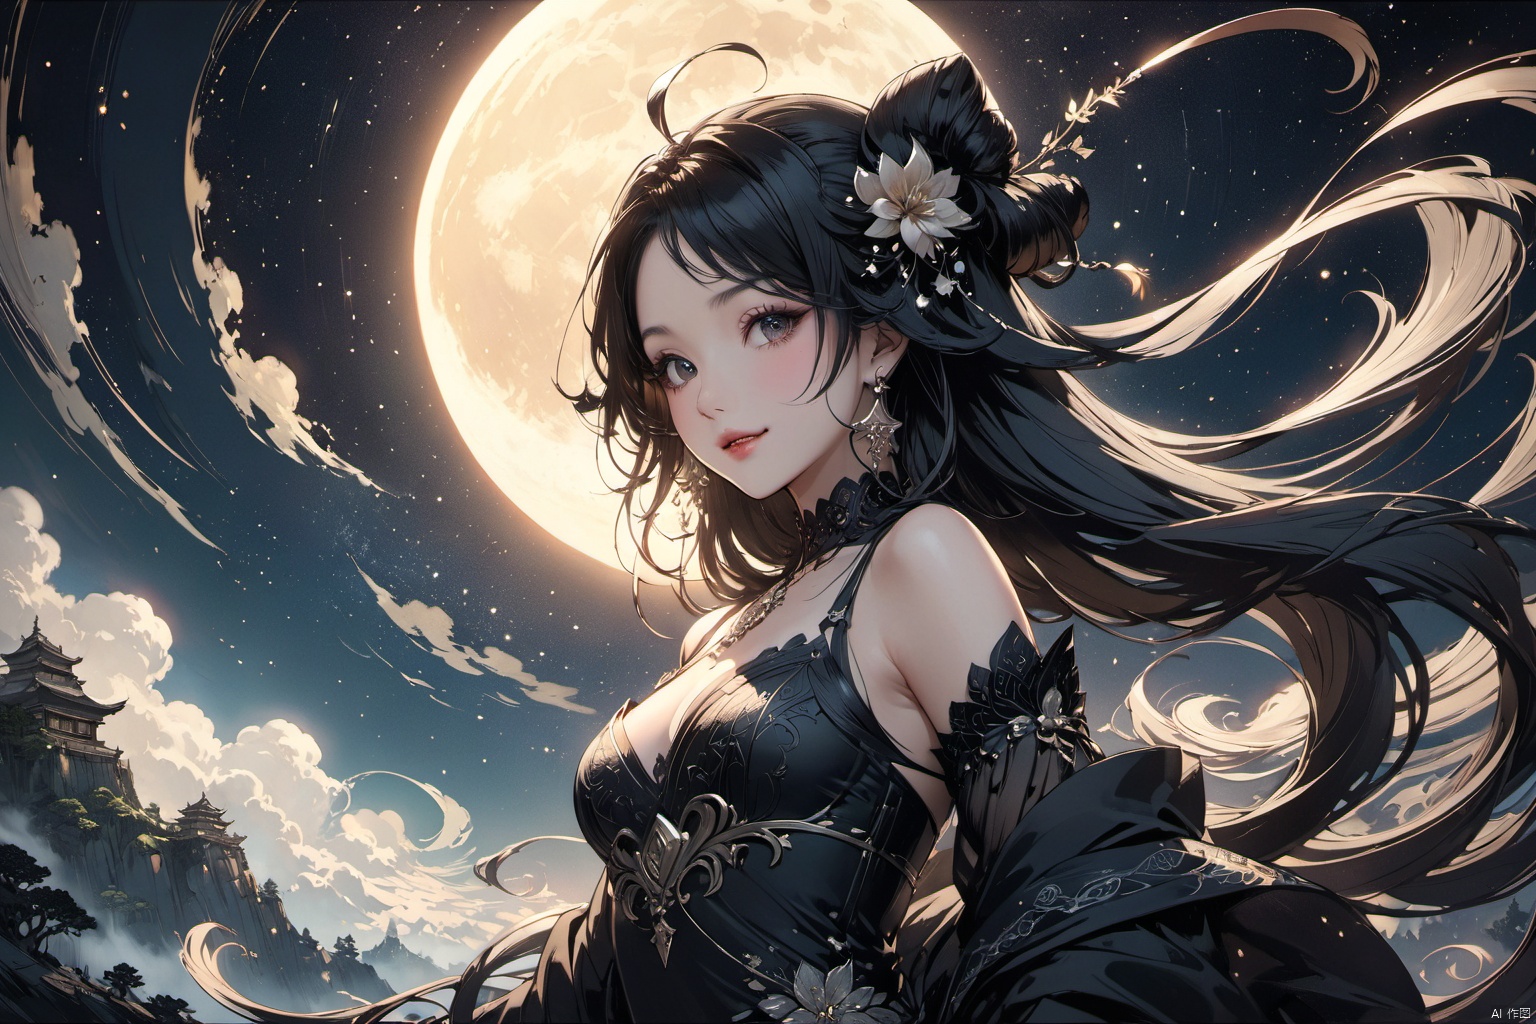 ultra-detailed,(best quality),((masterpiece)),(highres),original,extremely detailed 8K wallpaper,(an extremely delicate and beautiful),anime,  ((close up  , solo), black  theme, 

An epic fantasy illustration featuring a succubus with striking long hair and captivating eyes, enchanting all who behold her with a mesmerizing smile. The scene is set against a starlit sky with a crescent moon, bathed in cinematic lighting effects to enhance the storytelling ambiance. Drawing inspiration from the vibrant and unique character designs of Yoshitaka Amano, the artwork showcases a colorful palette, intricate background details, dynamic composition, and rich emotional expressions that bring the character to life.